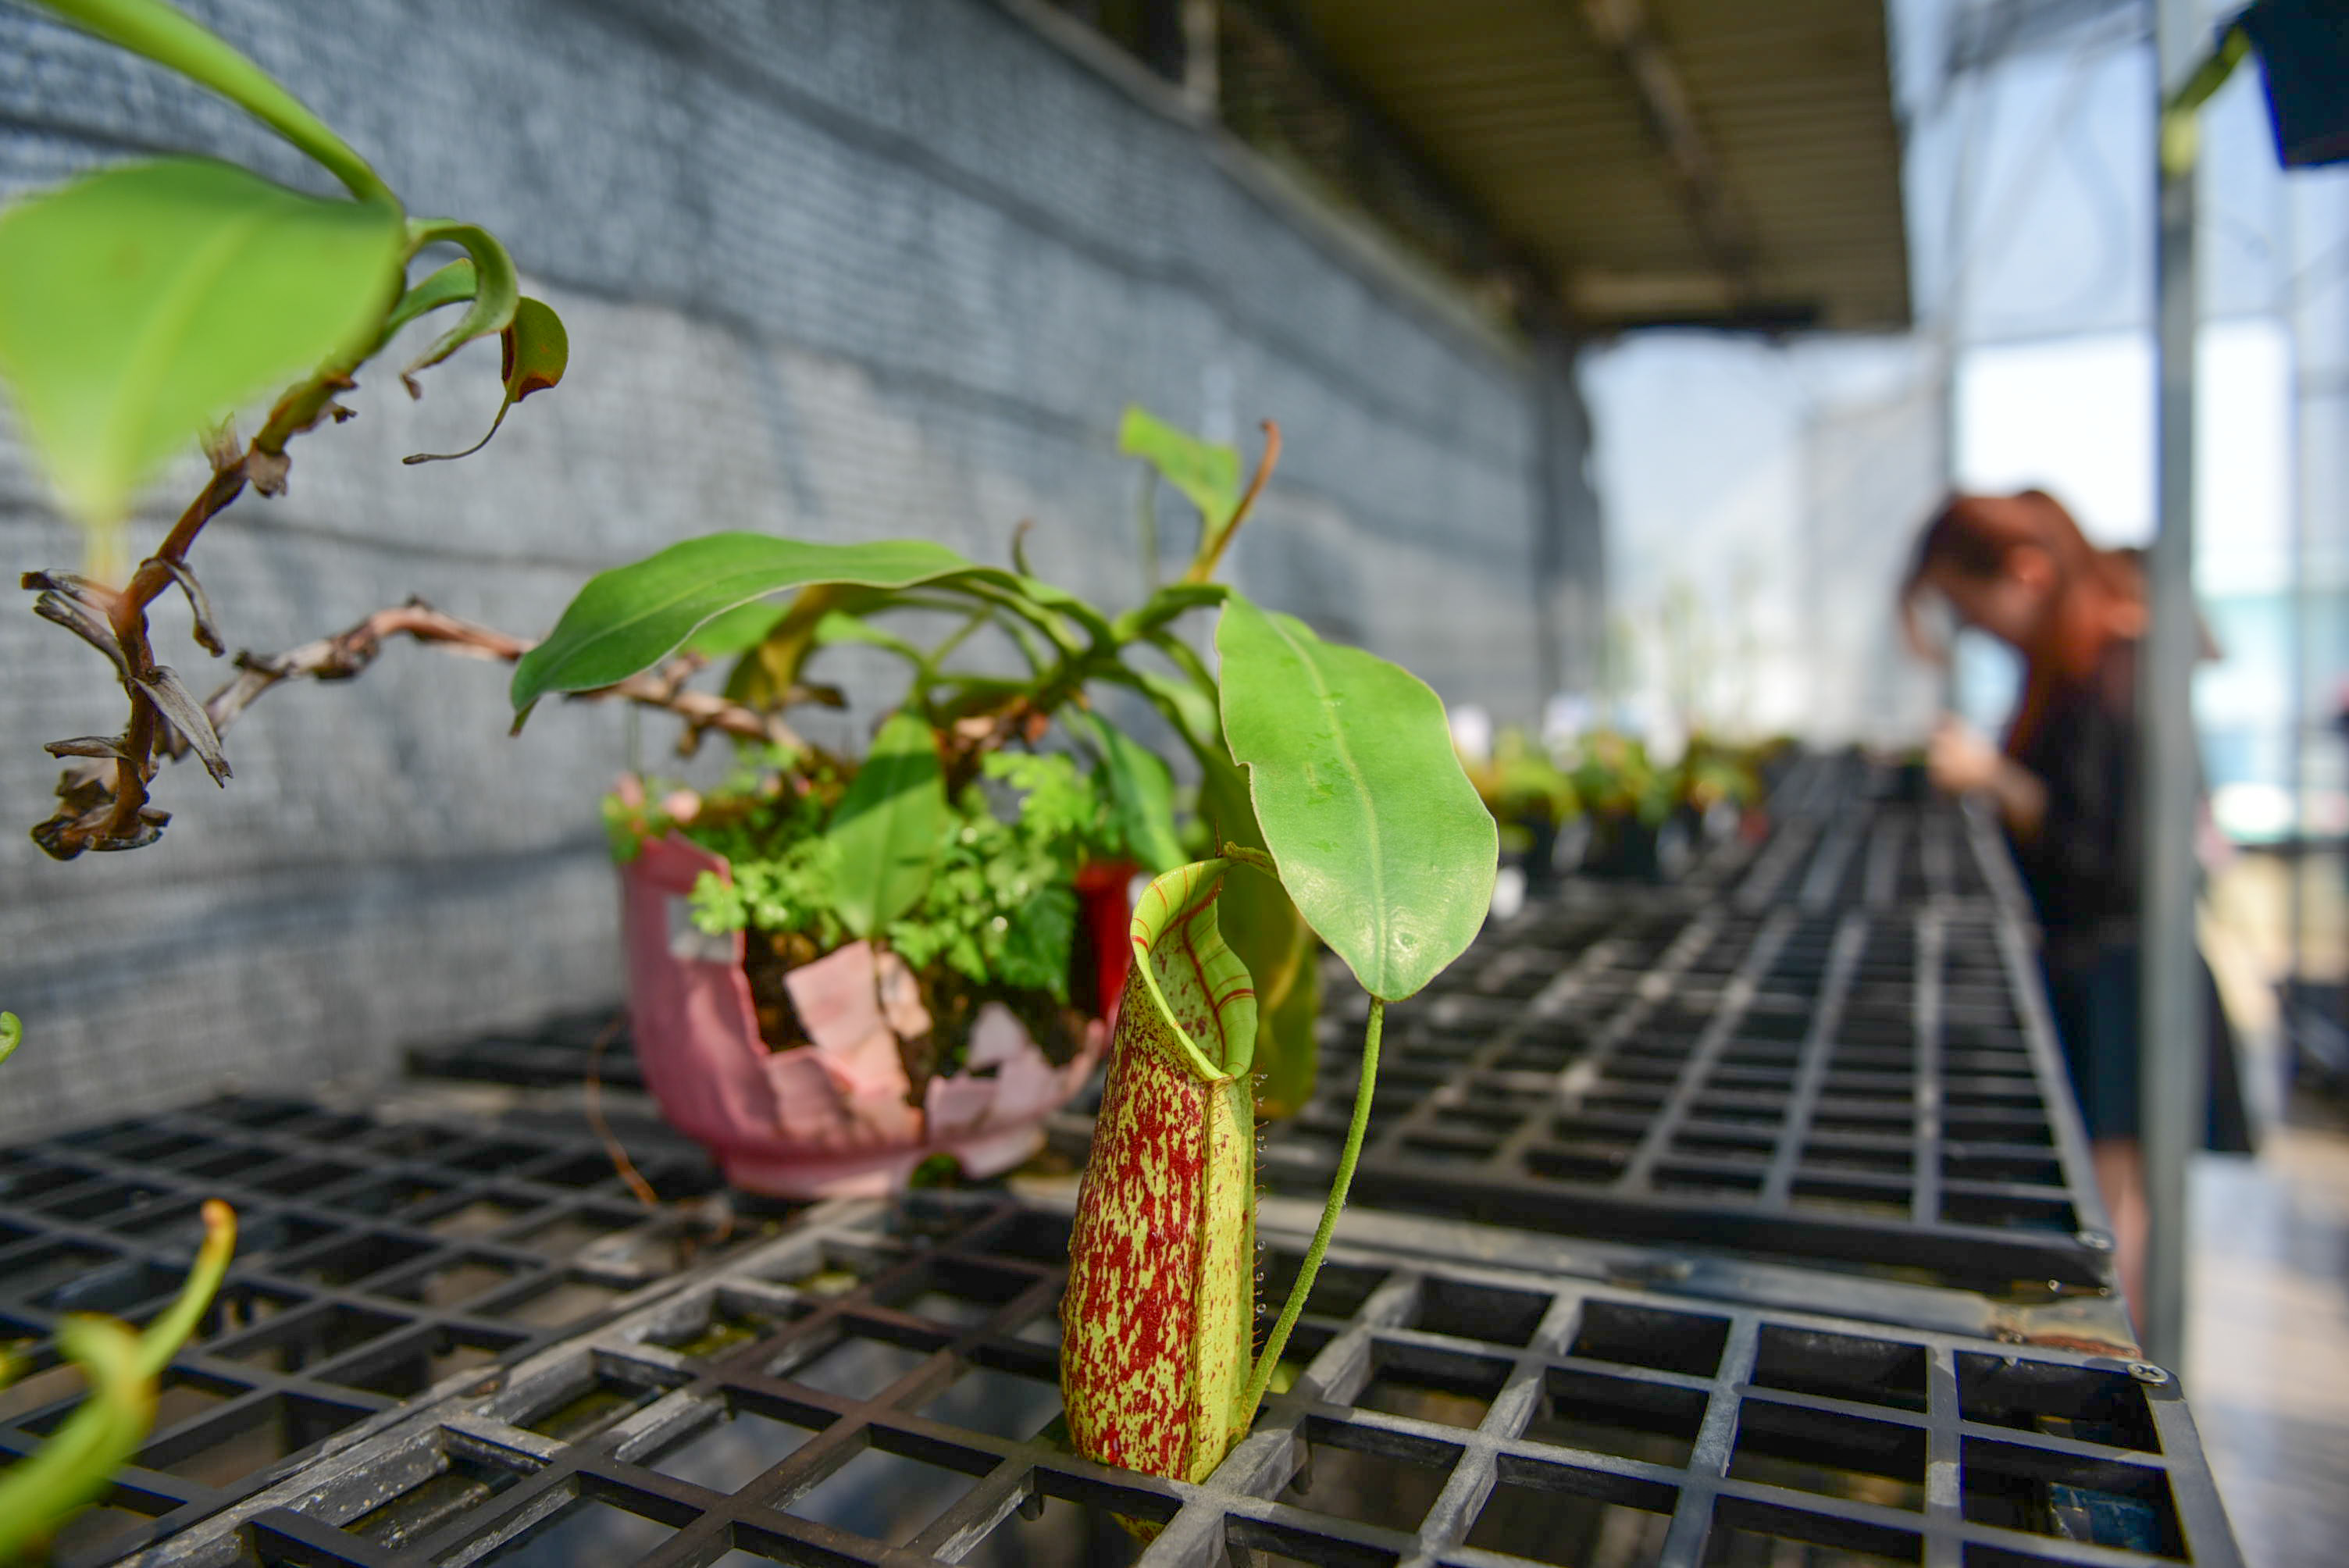 A swamp pitcher-plant in Thu’s garden. Photo: Ngoc Phuong / Tuoi Tre News